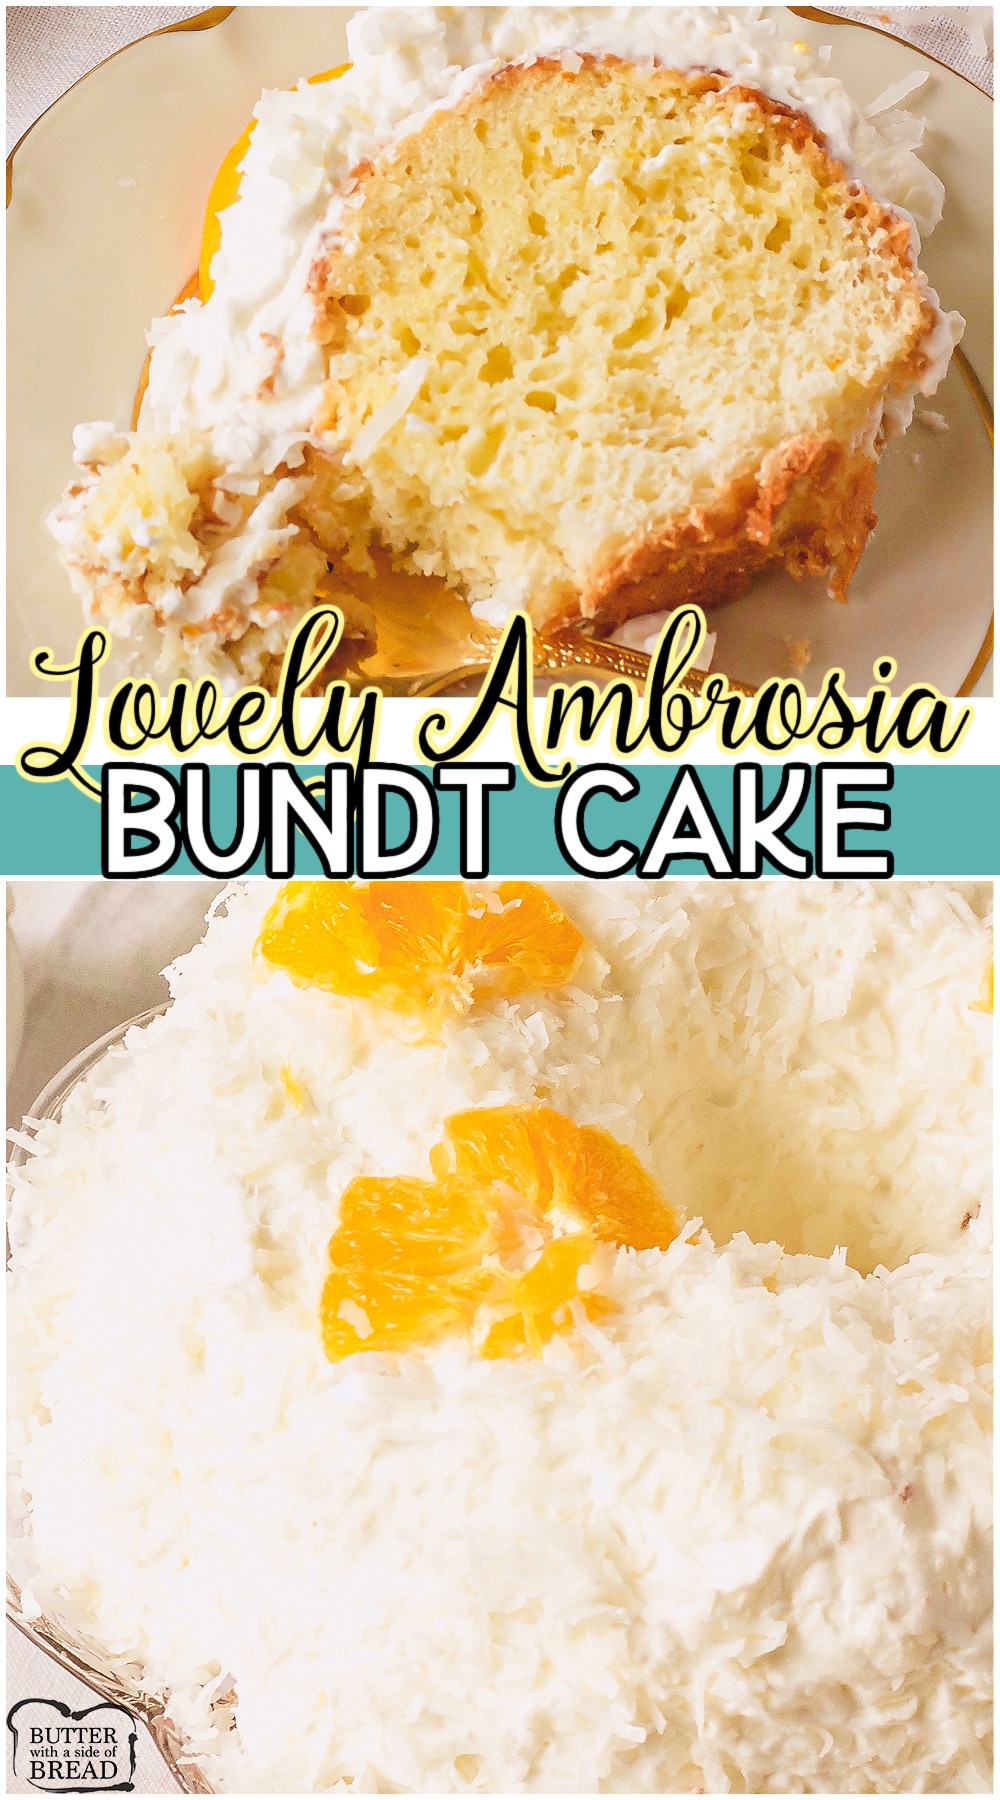 Ambrosia Bundt Cake is a fun twist on classic Ambrosia Salad, baked into a cake! Our Ambrosia Cake recipe packs all the coconut citrus flavors into a bundt cake that everyone enjoys!